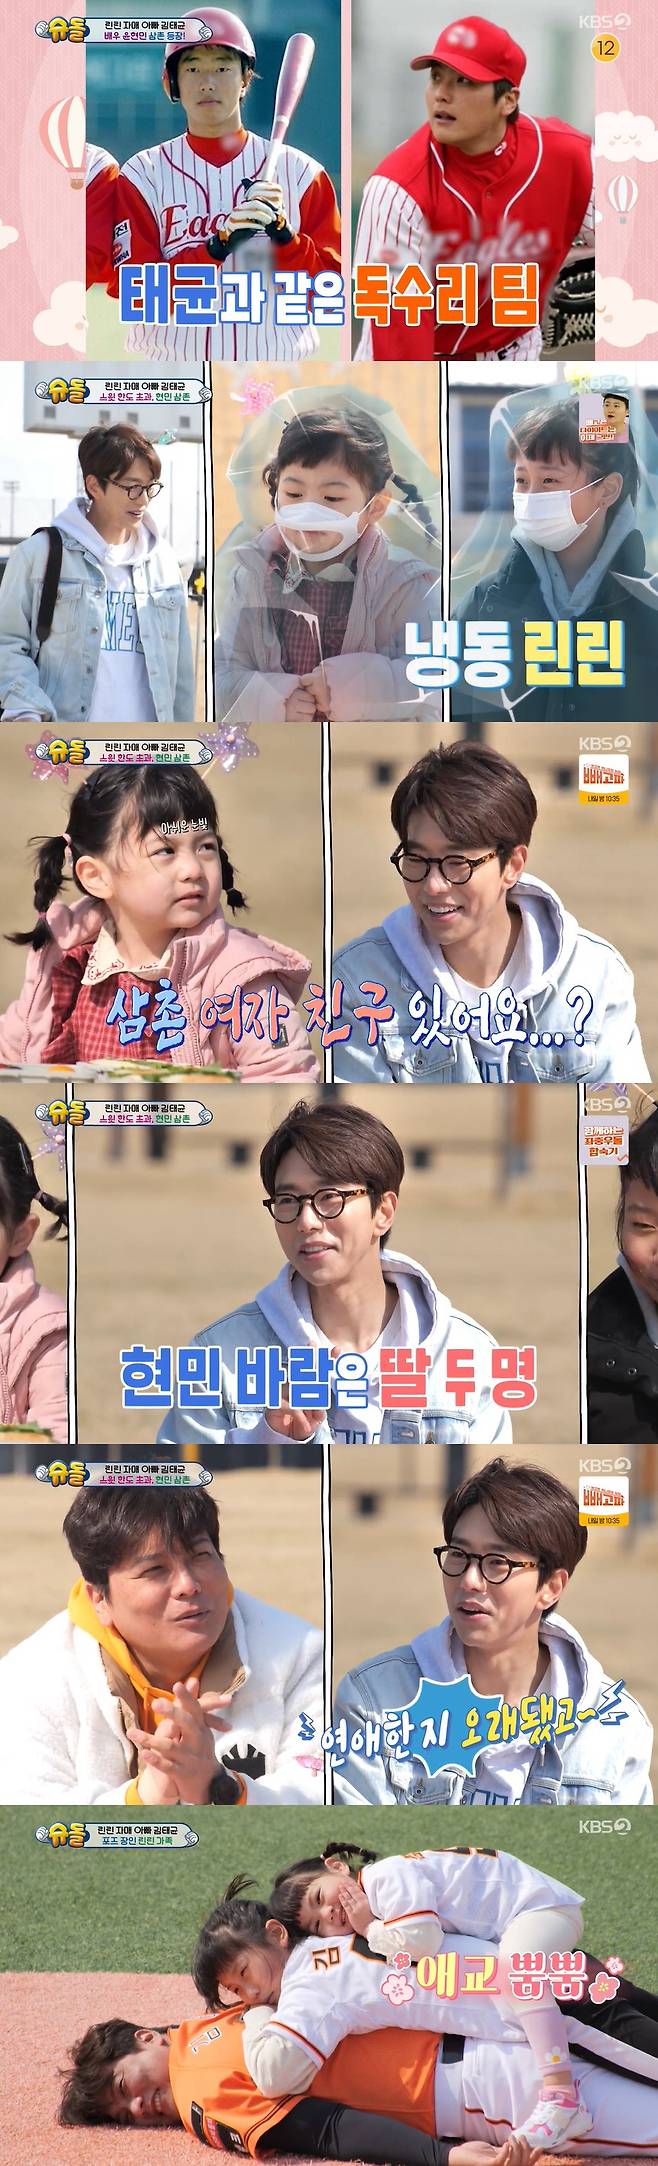 The Return of Superman Yon Hyon-min mentioned his marriage plan with GFriend Baek Jin-heeKBS 2TV Superman Returns broadcast on the 13th was decorated with We Love You Spring.Kim Tae-kyun said, I wanted to leave a pretty look when Harin was a baby, but I was sorry that I could not take a lot of pictures because of the hemangioma.So I am sorry for Harin, so I want to leave a record now, and I want to take a lot of pretty pictures. I planned a family portrait trip. Kim Tae-kyun invited actor Yoon Hyon-min as a photographer to film Family Portrait with Hyolyn, the Harin sisters.Yoon Hyon-min, who was a Nippon Professional Baseball player before his debut as an actor, showed off his affectionate aspect of bringing up camera equipment as well as sandwiches for Hyolyn and Harin sisters in the call of his senior Kim Tae-kyun.Hyolyn, the Harin sisters were shy and unfacing as the handsome The Uncle emerged.To get rid of the awkwardness with the kids, Yon Hyon-min told Hyolyn: Im a BTS fan too, you Jimins a fan.I am also a fan of Jimin, he said, leading to interest in the Ammy certification .Kim Tae-kyun was jealous, saying, The Uncle GFriend is there, breaking the dream, when the two daughters showed a 180-degree difference from what they did to him.Do children like it? he asked Baek Jin-hee and Yoon Hyon-min, who have been in love for six years.I am a three-brother, my nephew is a man, said Yoon Hyon-min. I will have a must daughter. I imagine I would like to have two daughters.But GFriend is three sisters, he replied.Kim Tae-kyun asked, Do you have all the plans with GFriend? And Yoon Hyon-min carefully mentioned marriage and child plan, saying, Its been a long time since I have loved it.On the other hand, Yoon Hyon-min prepared Nippon Professional Baseball, soldiers, and princess concept for Kim Tae-kyuns Family Portrait.Especially, when I saw the Kim Tae-yun family wearing uniforms, I could not hide my envy, saying, It is my romance, I would like to wear the uniform I wore when I was a player with my children.Yonghee, Seohyun, and Seeun Back Brother and Sister went on a walk in the neighborhood on the last day of a one-night, two-day trip without Father.Back and Sister, who had been led into a strange house by the sound of dog barking during the walk, found a group of chicks in the corner.In the desire to raise a chick, Yonghee asked, Can not you give me a chick Phoenix Marie? And Grandmas Boy presented a chick.So, Seohyun said, I will return it when I become a chicken.Seeun, who wanted his own chick, said, I want to raise it too, and Yonghee warned, One Phoenix Marie can eat with chicken (?).However, Se-eun, who could not give up the chicks even after his brothers warning, eventually got his own chicks separately.So Yo-jin, who saw the chicks that Back Brother and Sister got, fell into a menbung, but calmly persuaded the children.So BackBrowther and Sister decided to build a chick house and return it to Grandmas Boy.It was a short time, but the back and Sister gave the chick an apple and a pongpong name and gave affection to the chick.Sayuri and Jen headed to Japan to meet Grandmas Boy, grandfatherGrandmas Boy, who met her daughter and grandchild in about 406 days, did not leave a smile on her grandfathers mouth.Grandmas Boy said, I was a little scared because I was not familiar because I did not meet my daughter and grandchildren for a long time. However, I was more relieved that Jen was a healthy child because she was much bigger and stronger than I watched on TV. I thought I wouldnt be able to come to Japan for about a year, but I was so surprised to come suddenly, and I was surprised that (Zen) was very healthy and changed so much.I thought I should try and live healthy. On this day, Jen had a joke in front of Grandmas Boy, Grandpa, who had met for a long time.Sayuri said, Pretty, and he quickly understood the words, stabbed the ball with his fingers, and when he called his name, he raised his hand as if to answer, and surprised Grandmas Boy, Grandpa.In particular, Grandmas Boy and Grandpa showed off the aspect of grandchild fool by shouting genius genius with explosive reaction in the appearance of Jen who understands not only Korean but also Japanese.